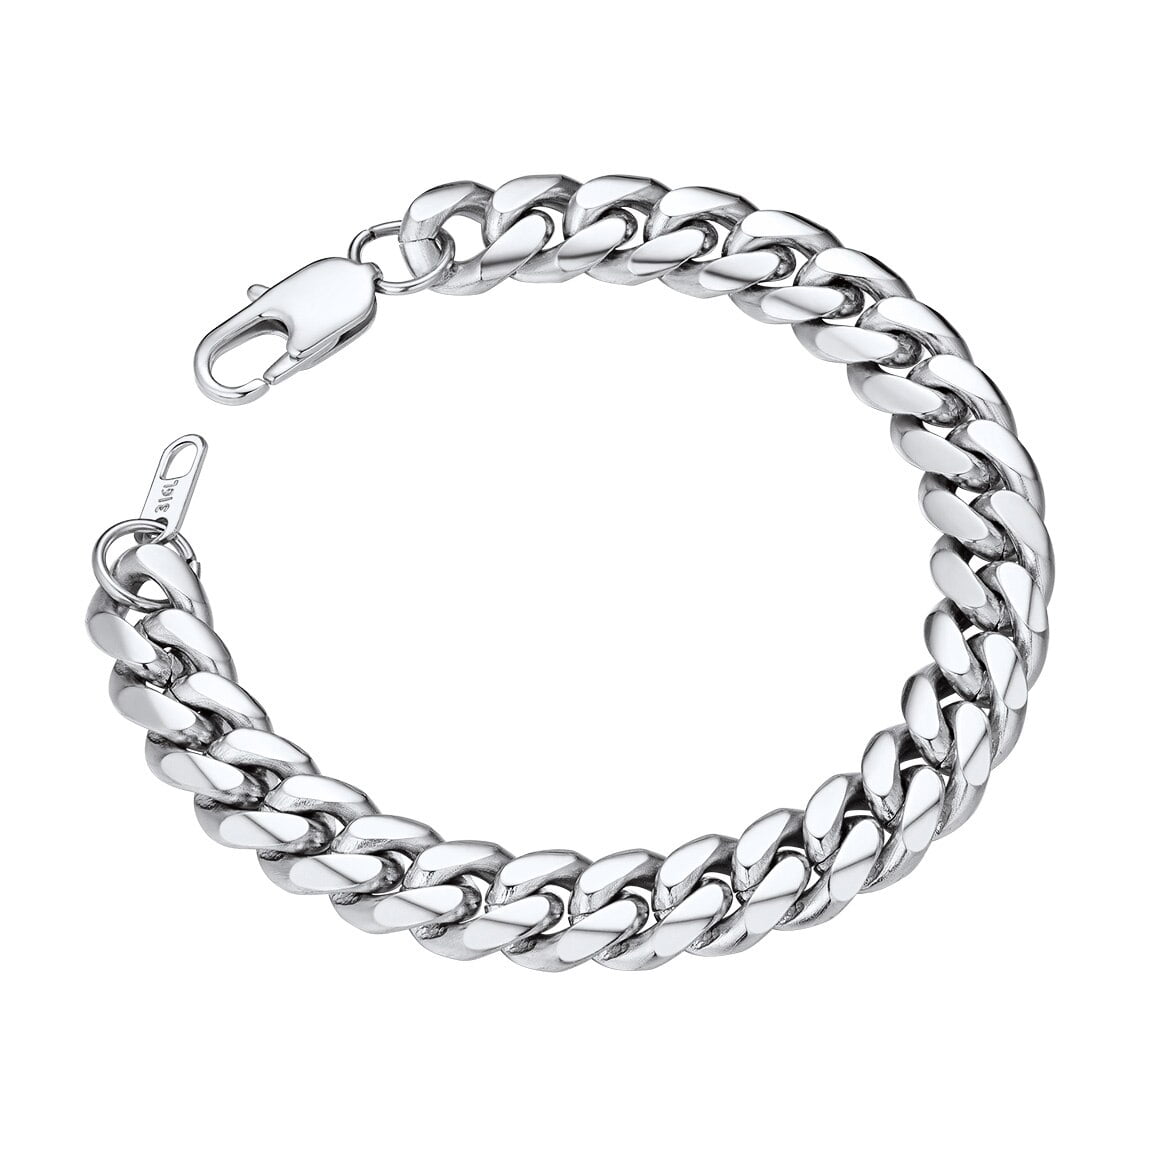 ChainsProMax Mens Chain Bracelet Stainless Steel Curb Chain Bracelet ...